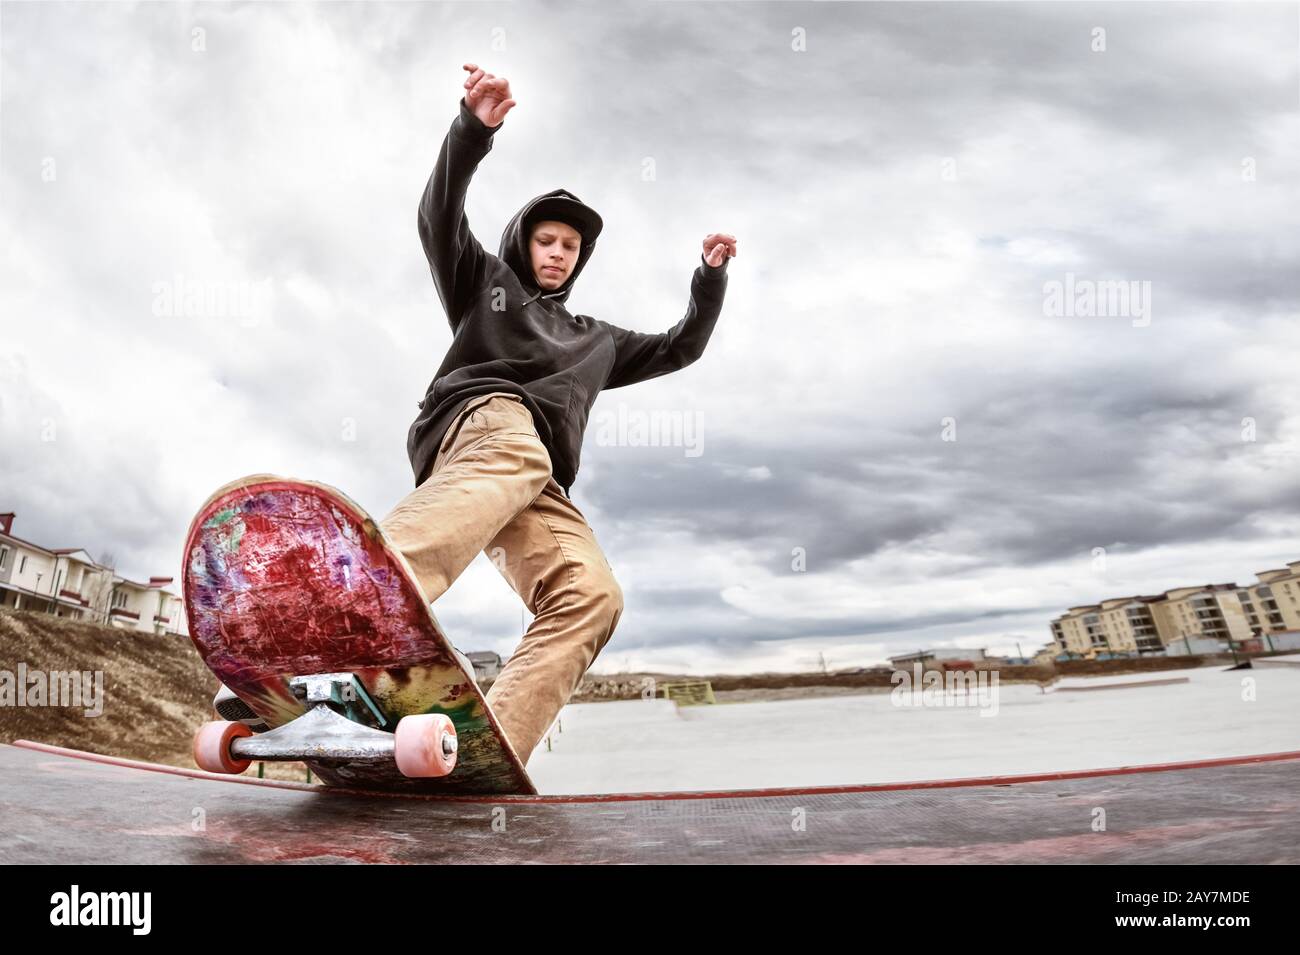 Teen skater in a hoodie sweatshirt and jeans slides over a railing on a skateboard in a skate park Stock Photo